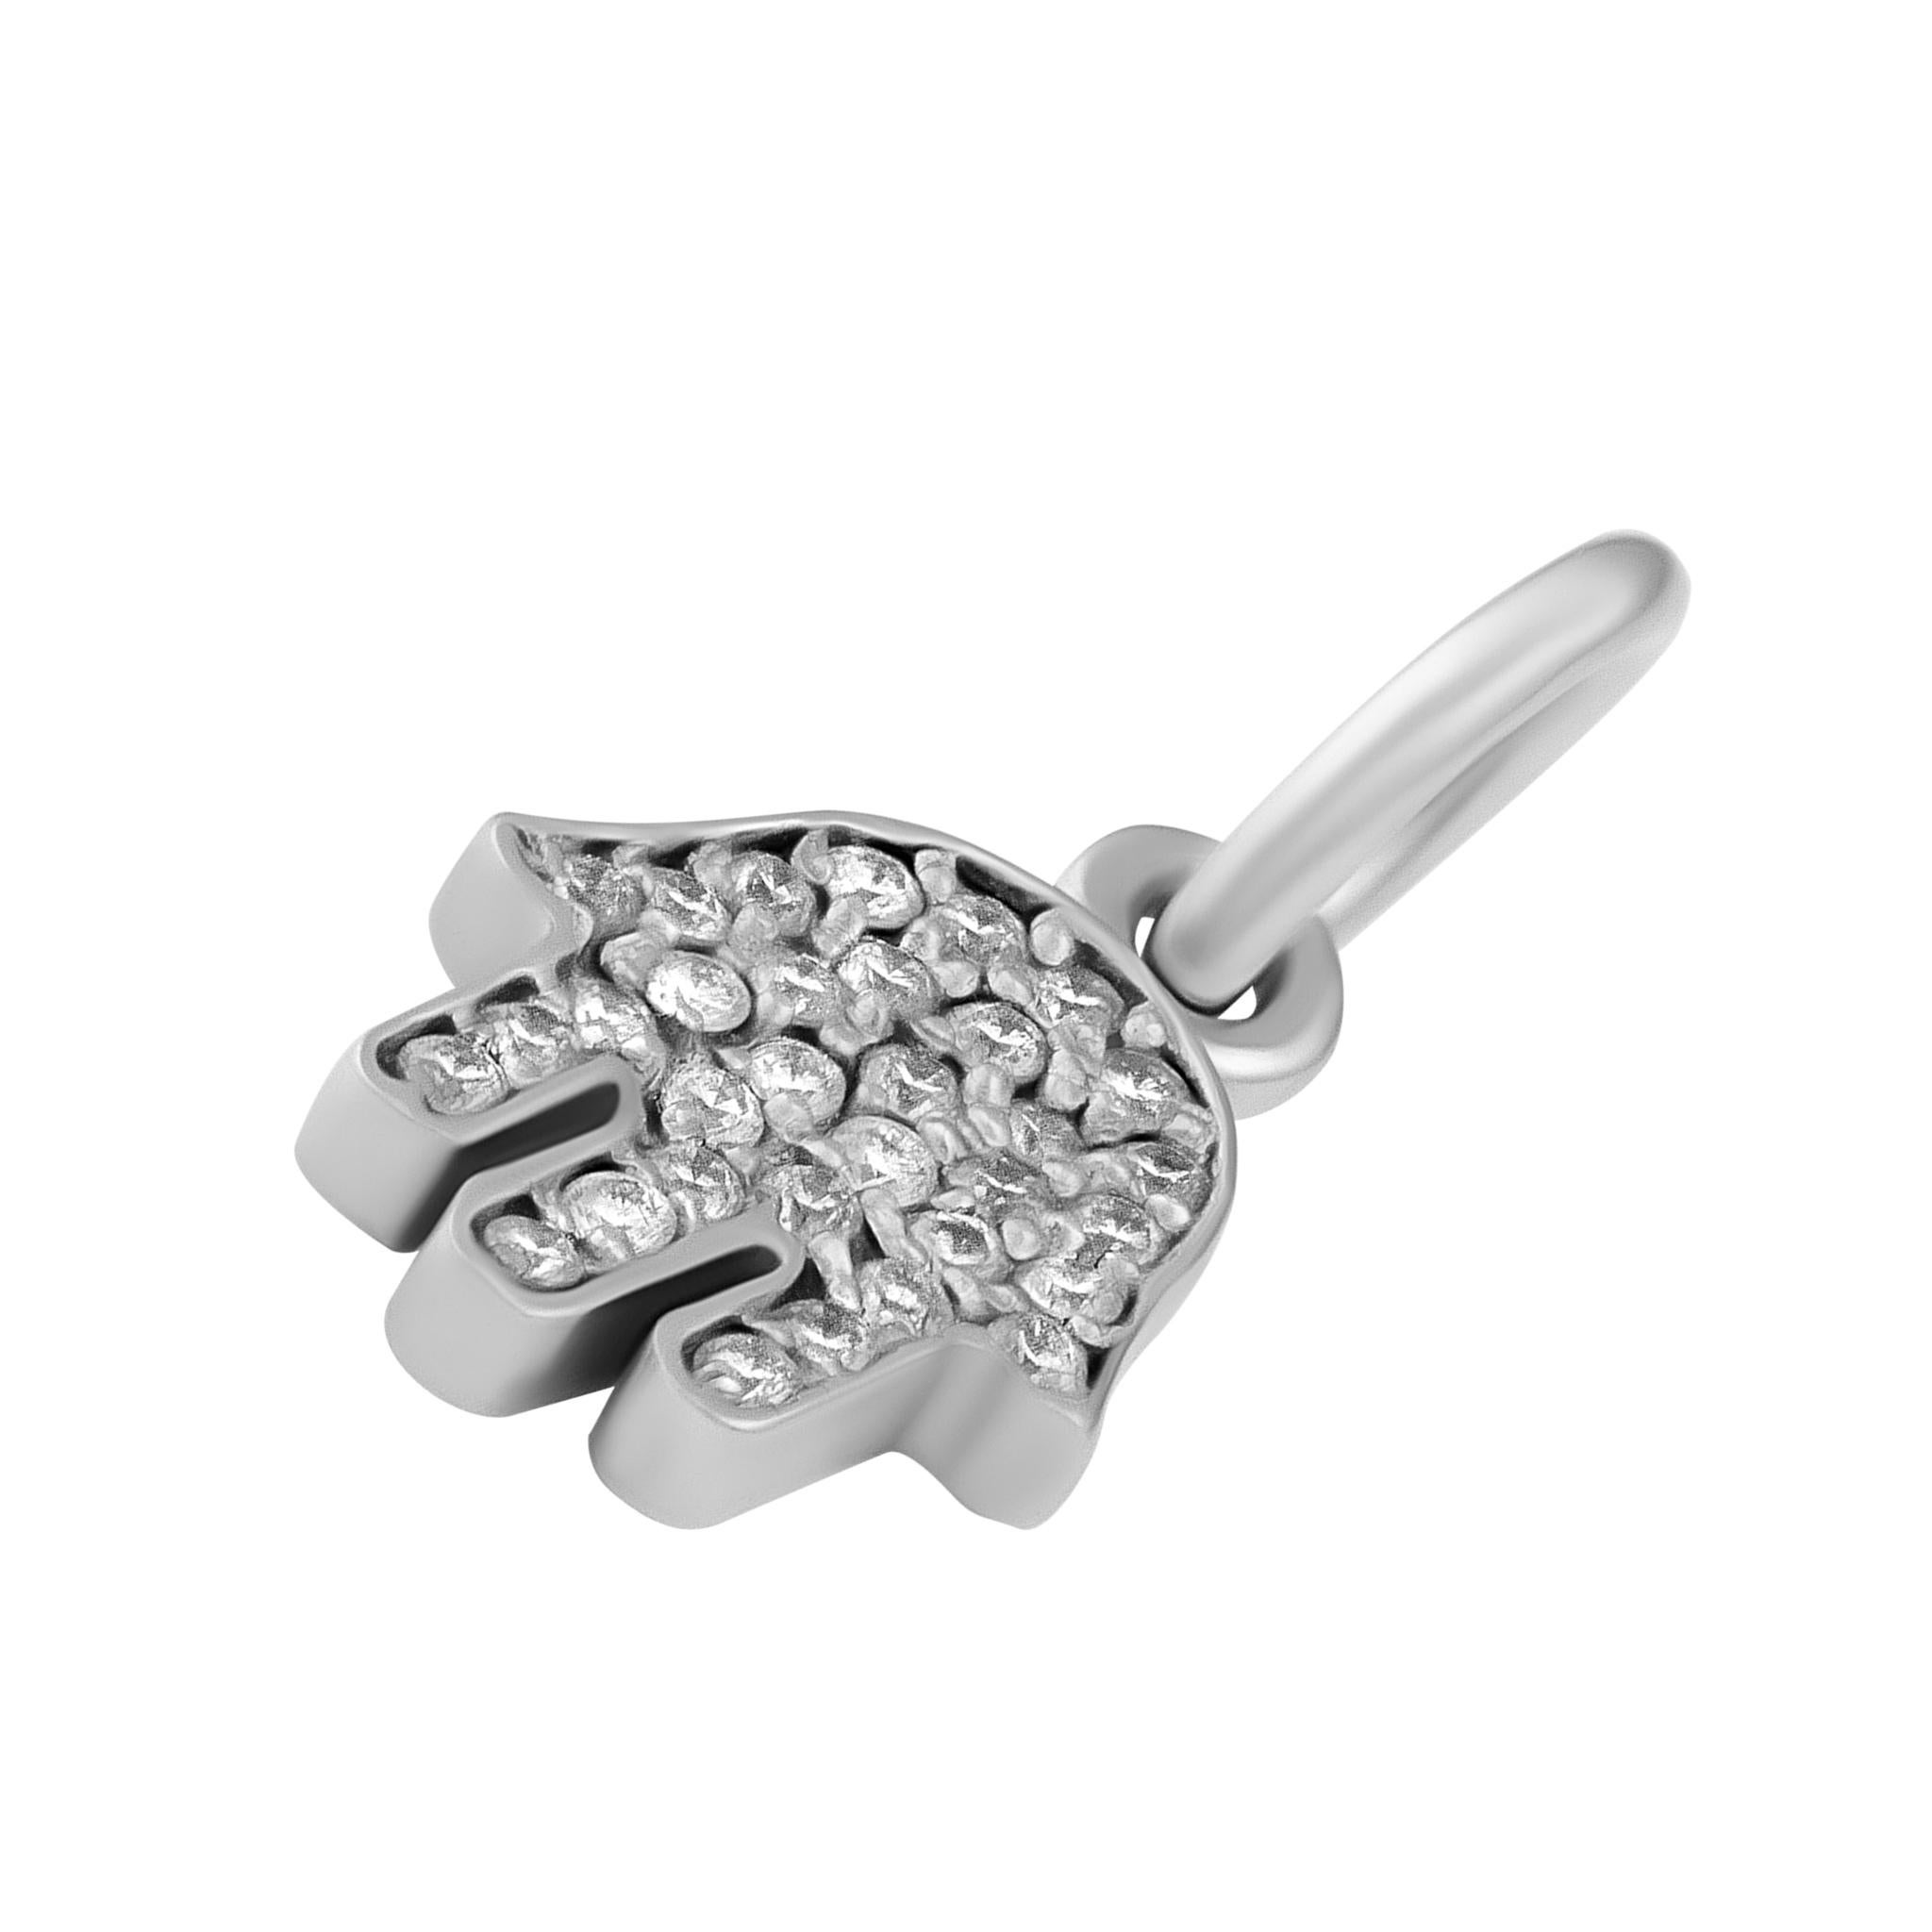 Diamond Pave Hand Charm
Reference number: ABS01195